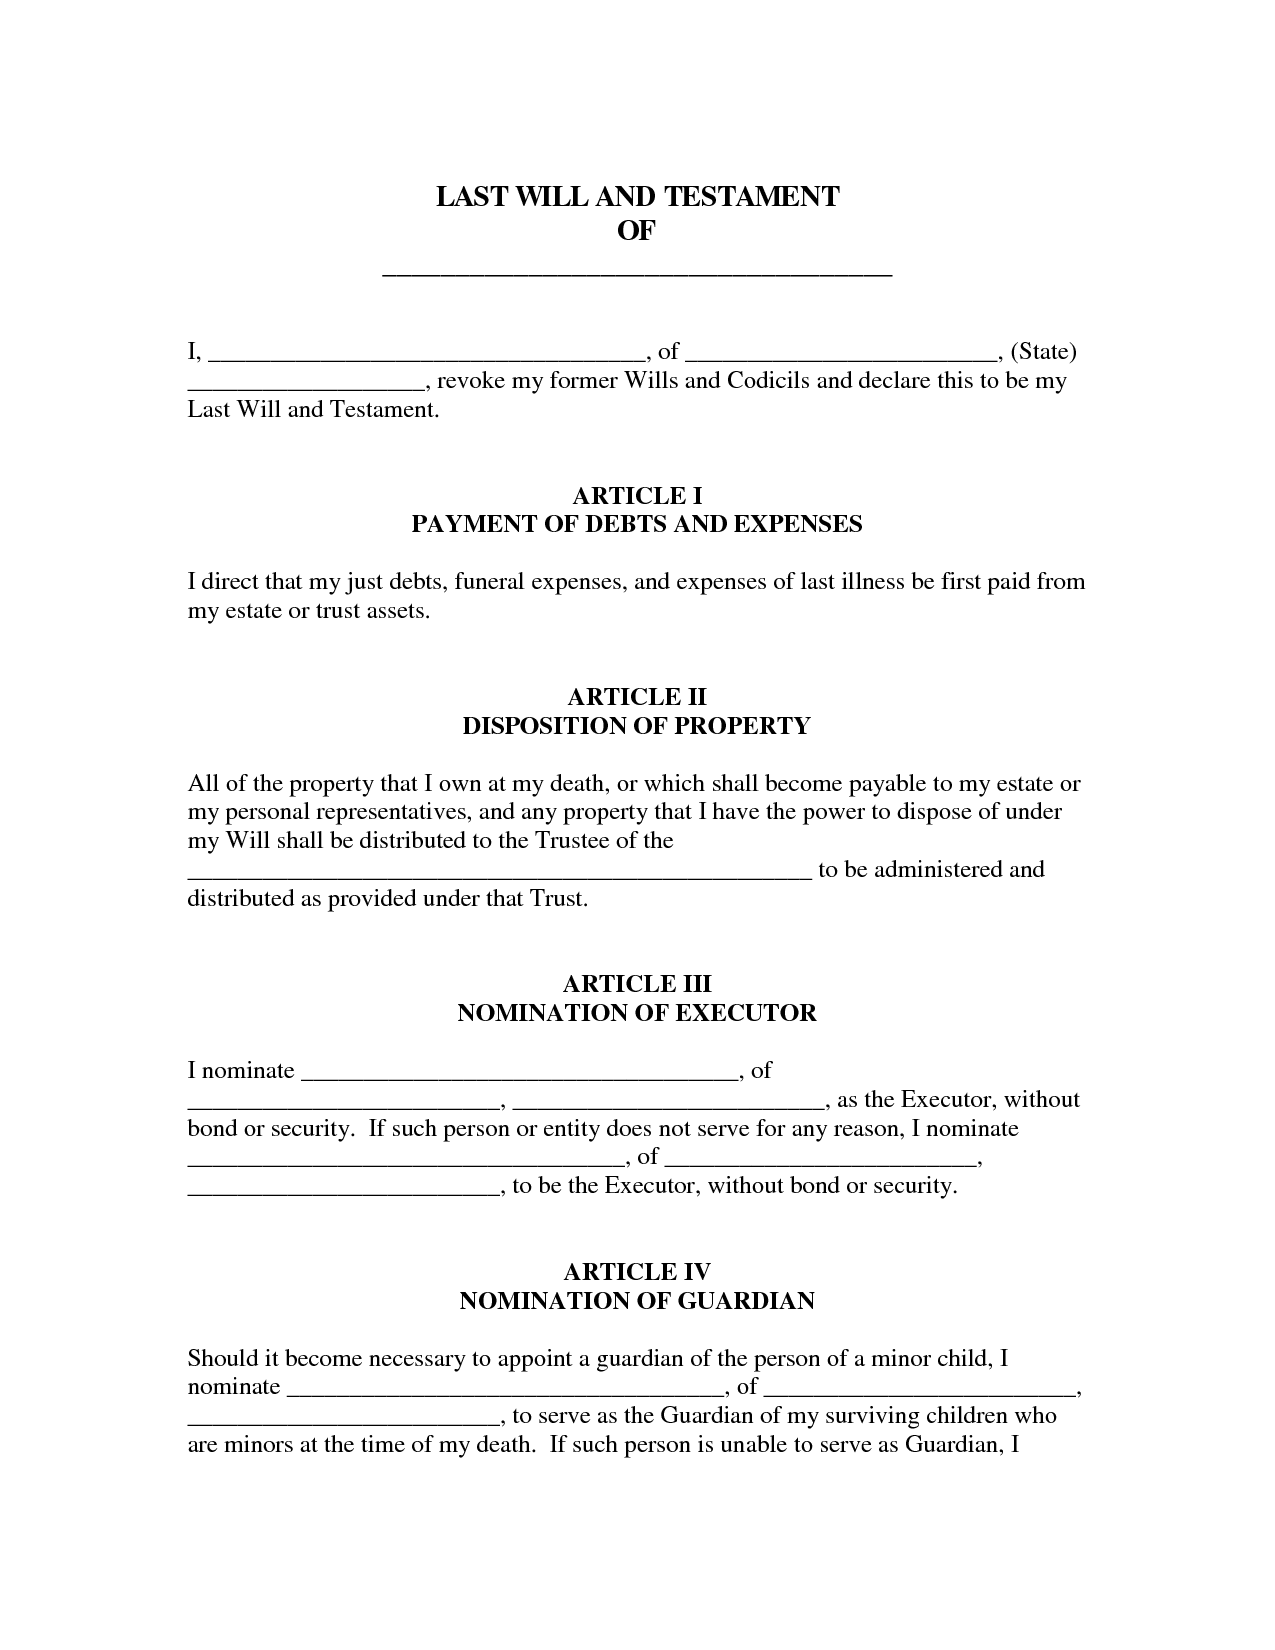 Last Will And Testament Printable